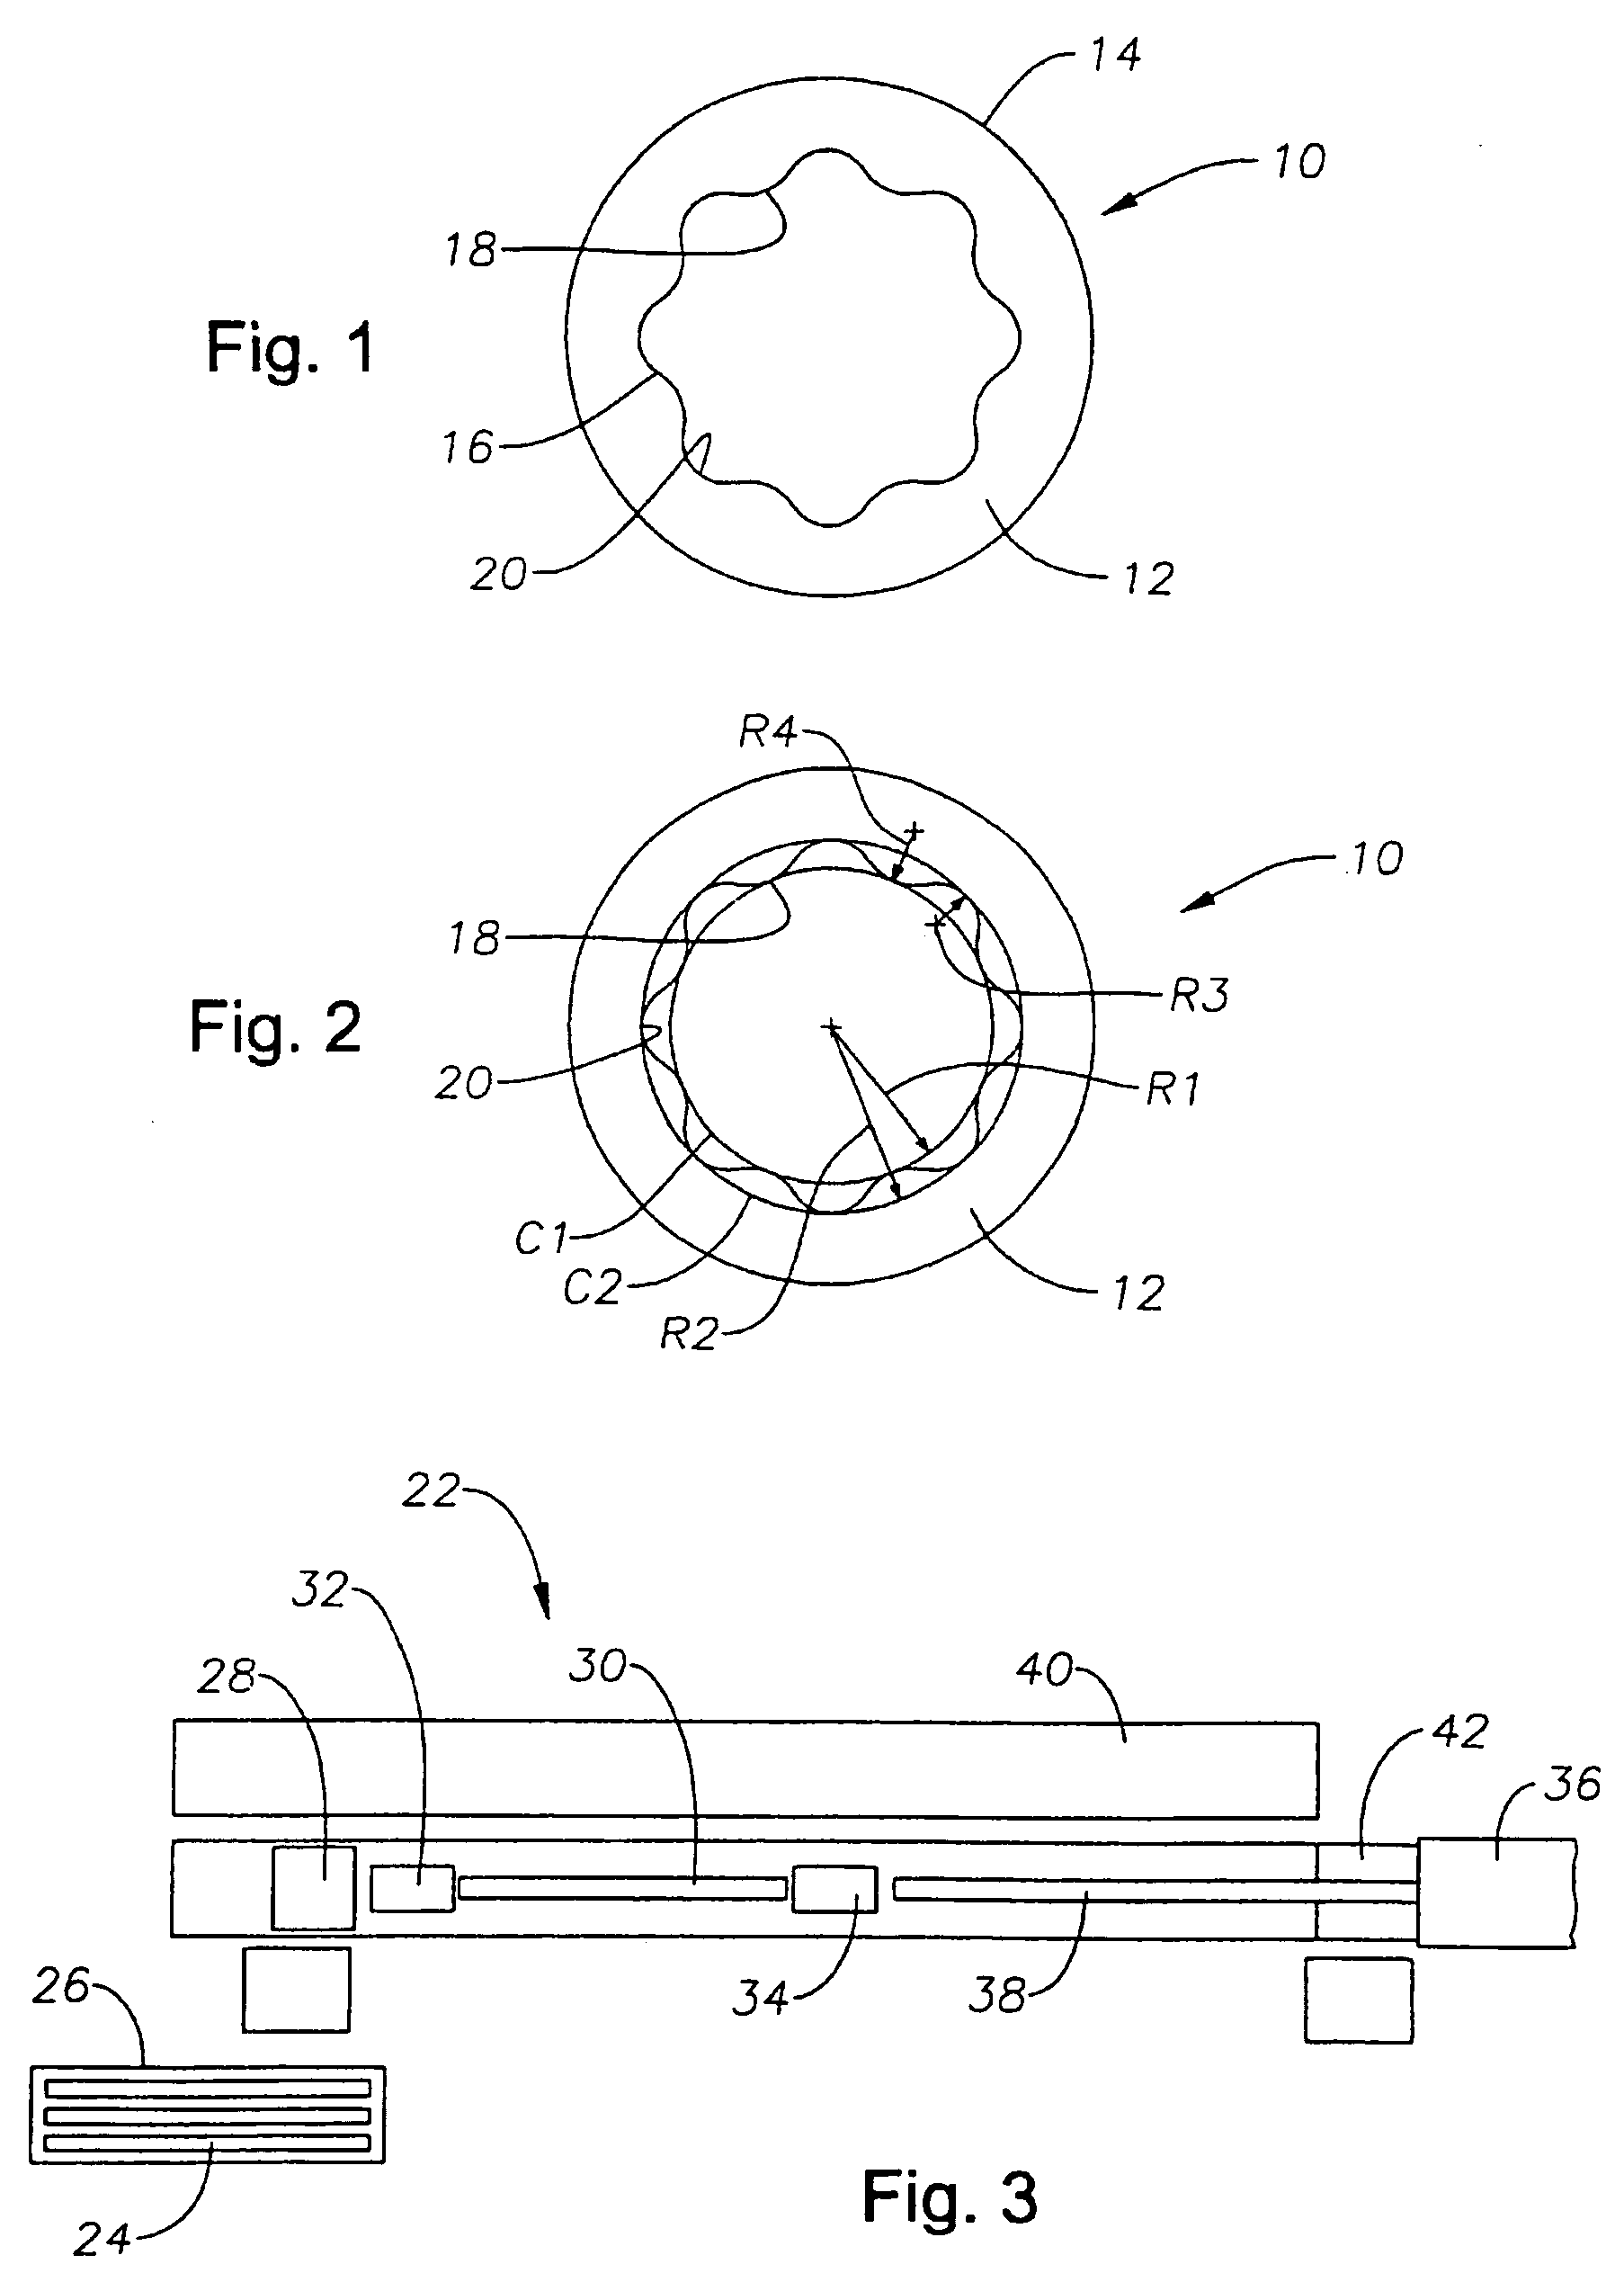 Centrifugally-cast tube and related method and apparatus for making same